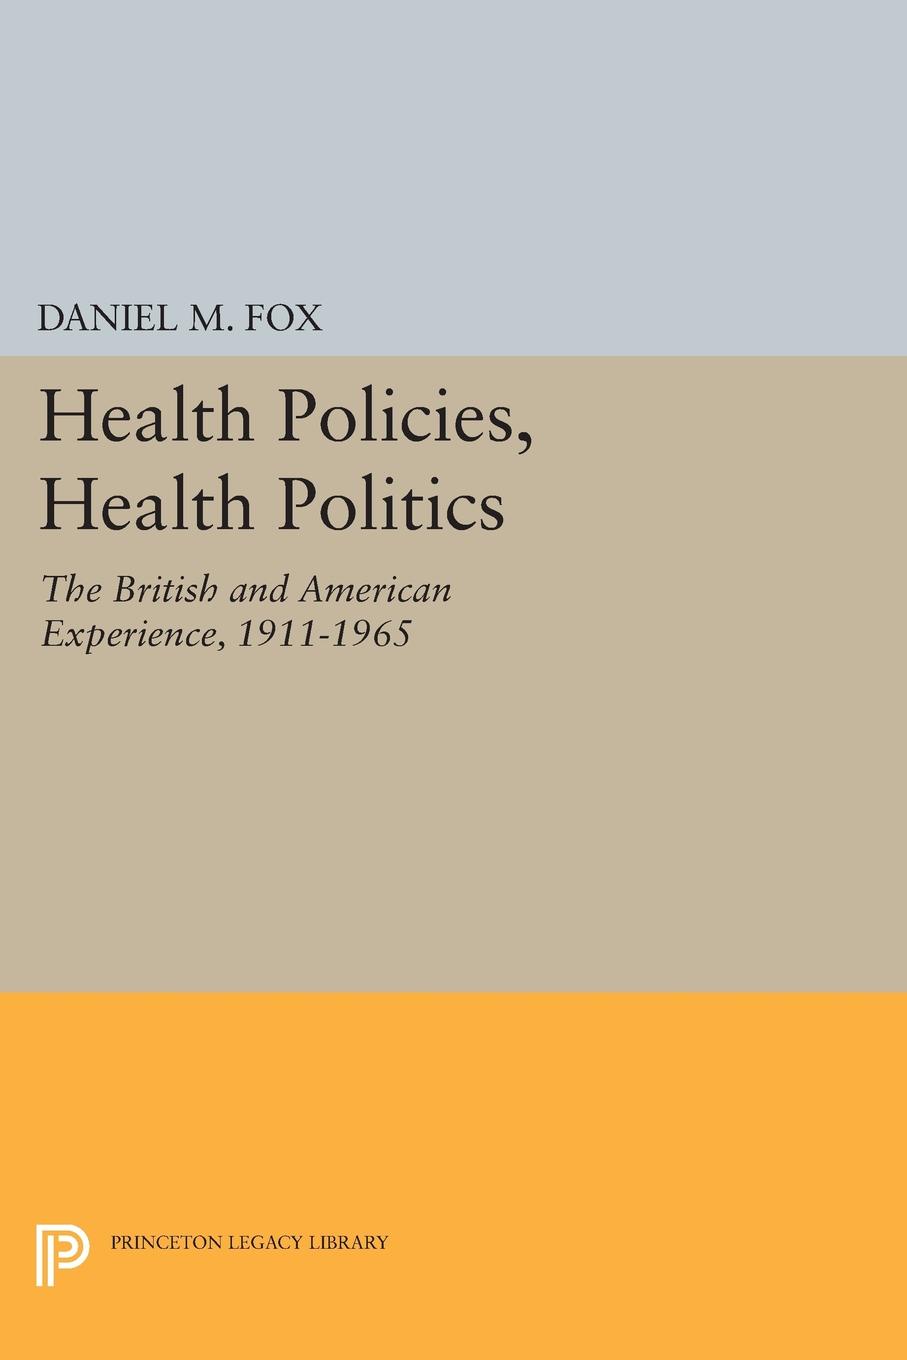 Health Policies, Health Politics. The British and American Experience, 1911-1965